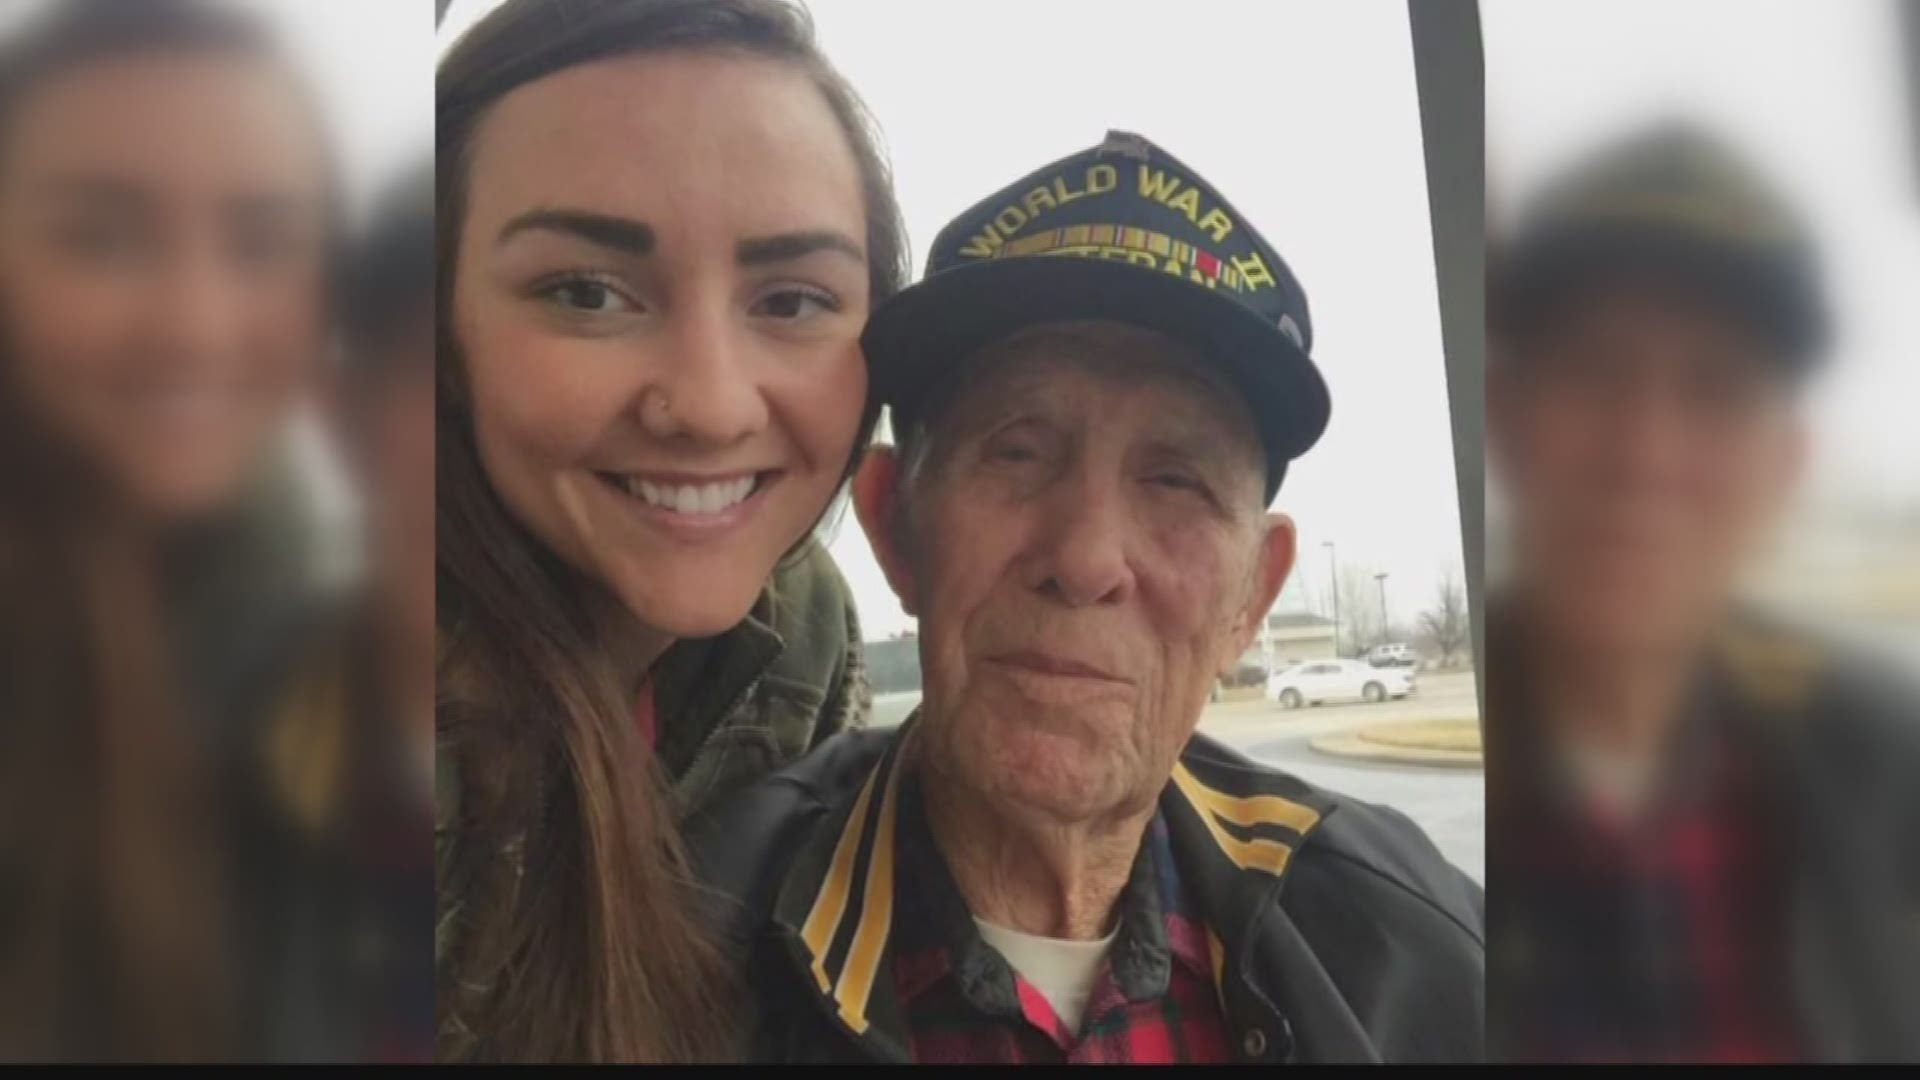 A 21-year-old college student just wanted to thank a 93-year-old veteran for his service. Soon, strangers became friends and hidden stories came to light.